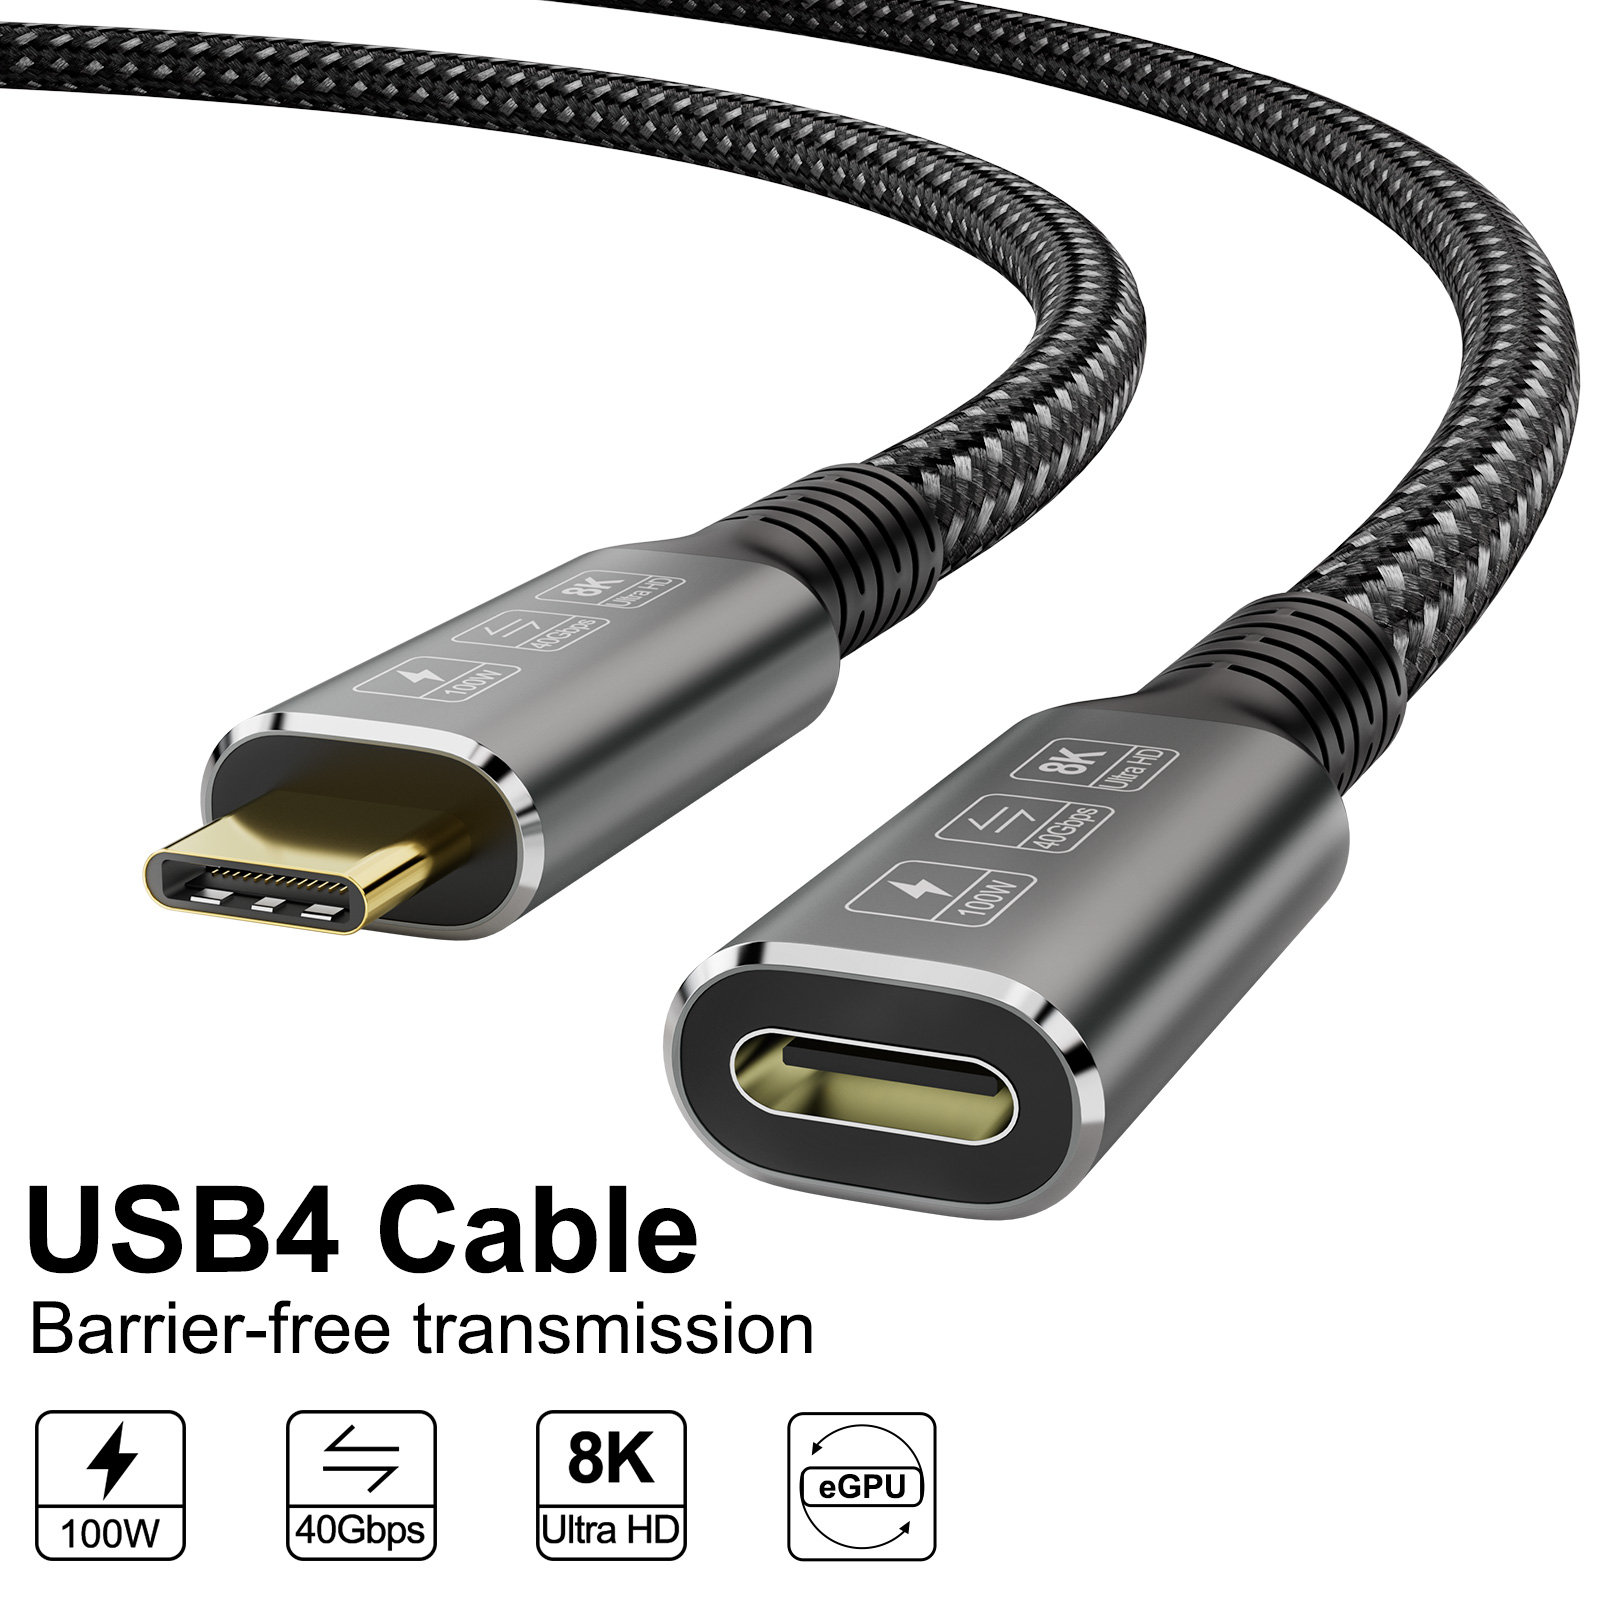 CableDeconn USB4 8K Cable 0.8M Thunderbolt 4 Compatible 4 Type-c Male to Extension Cable Ultra HD 100W Charging 40Gbps Data Transfer Compatible with External SSD eGPU F0408-USB C Cable-CableDeconn